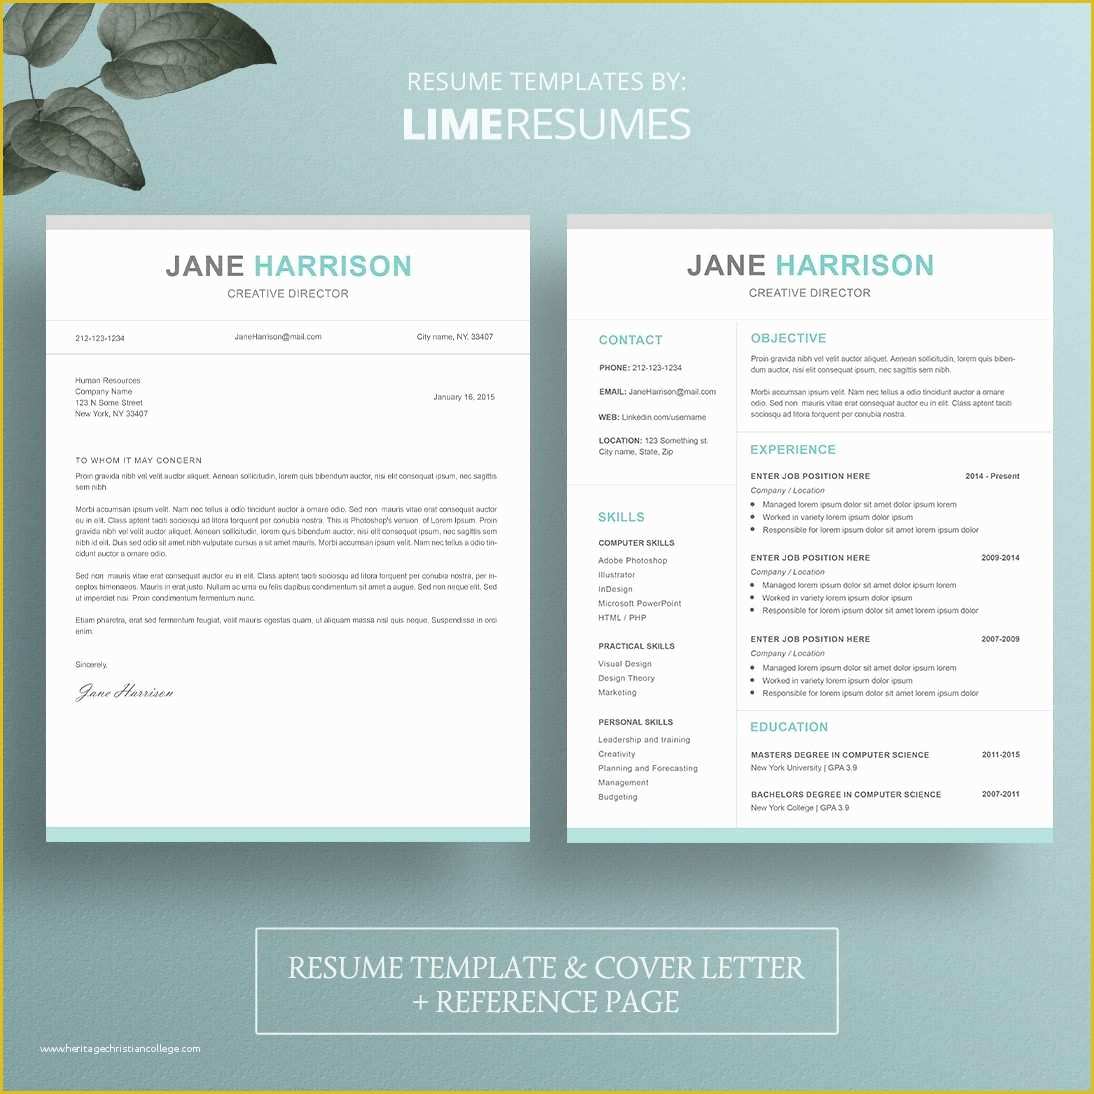 Microsoft Word Cv Templates Free Download Of Creative Resume Templates Free Download for Microsoft Word